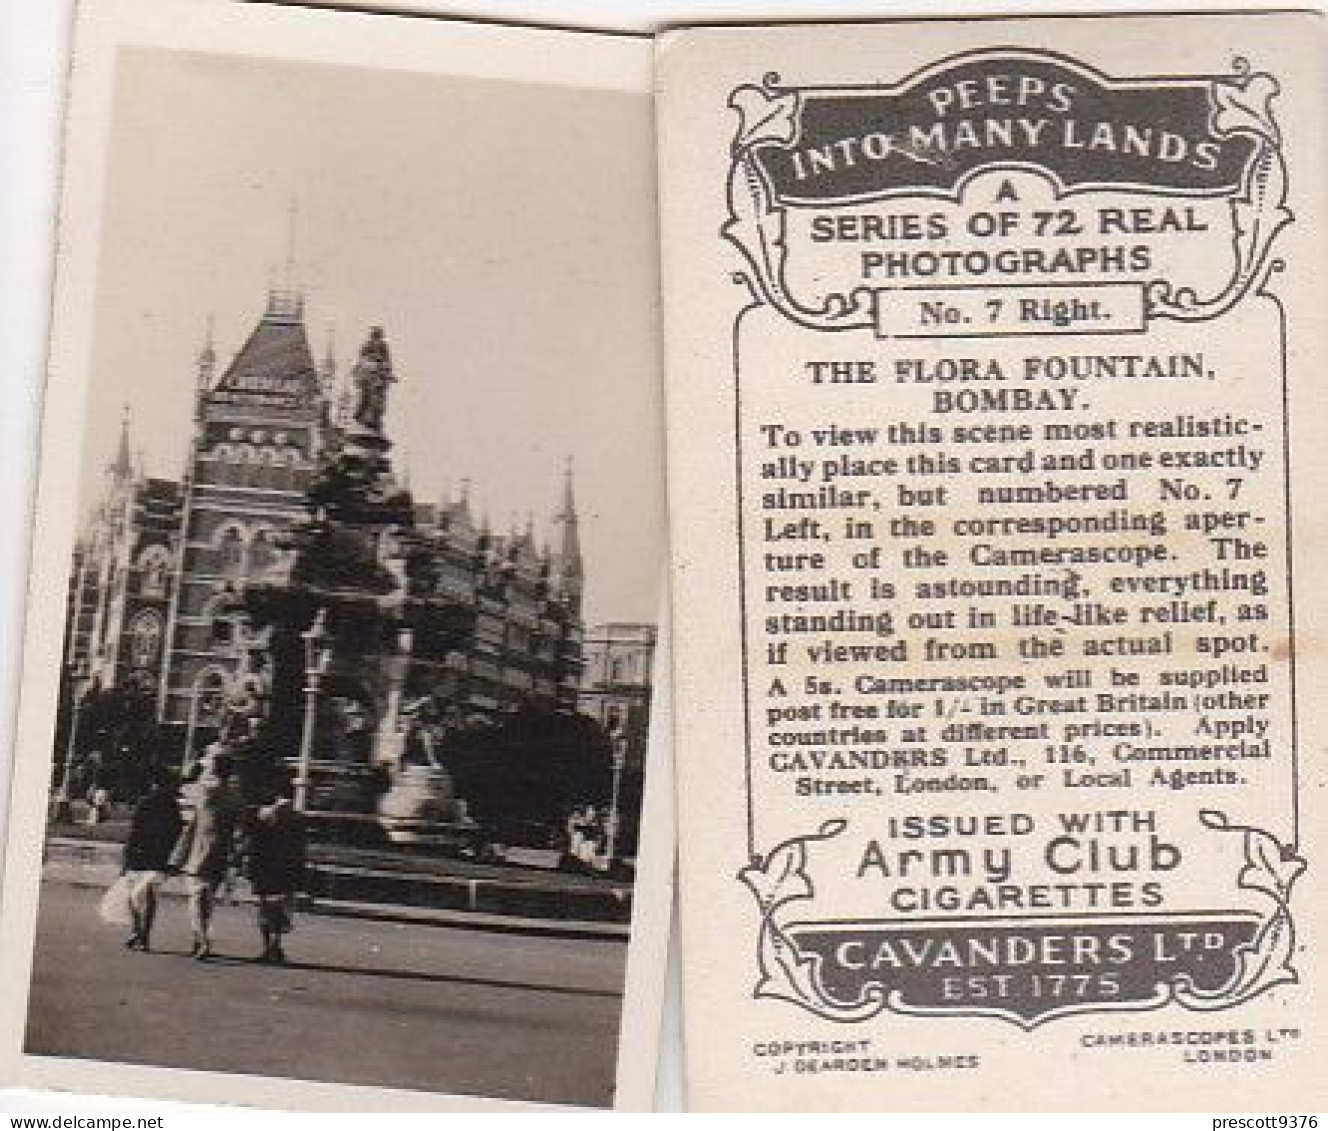 7 Flora Fountain, Bombay  - PEEPS INTO MANY LANDS A 1927 - Cavenders RP Stereoscope Cards 3x6cm - Stereoskope - Stereobetrachter